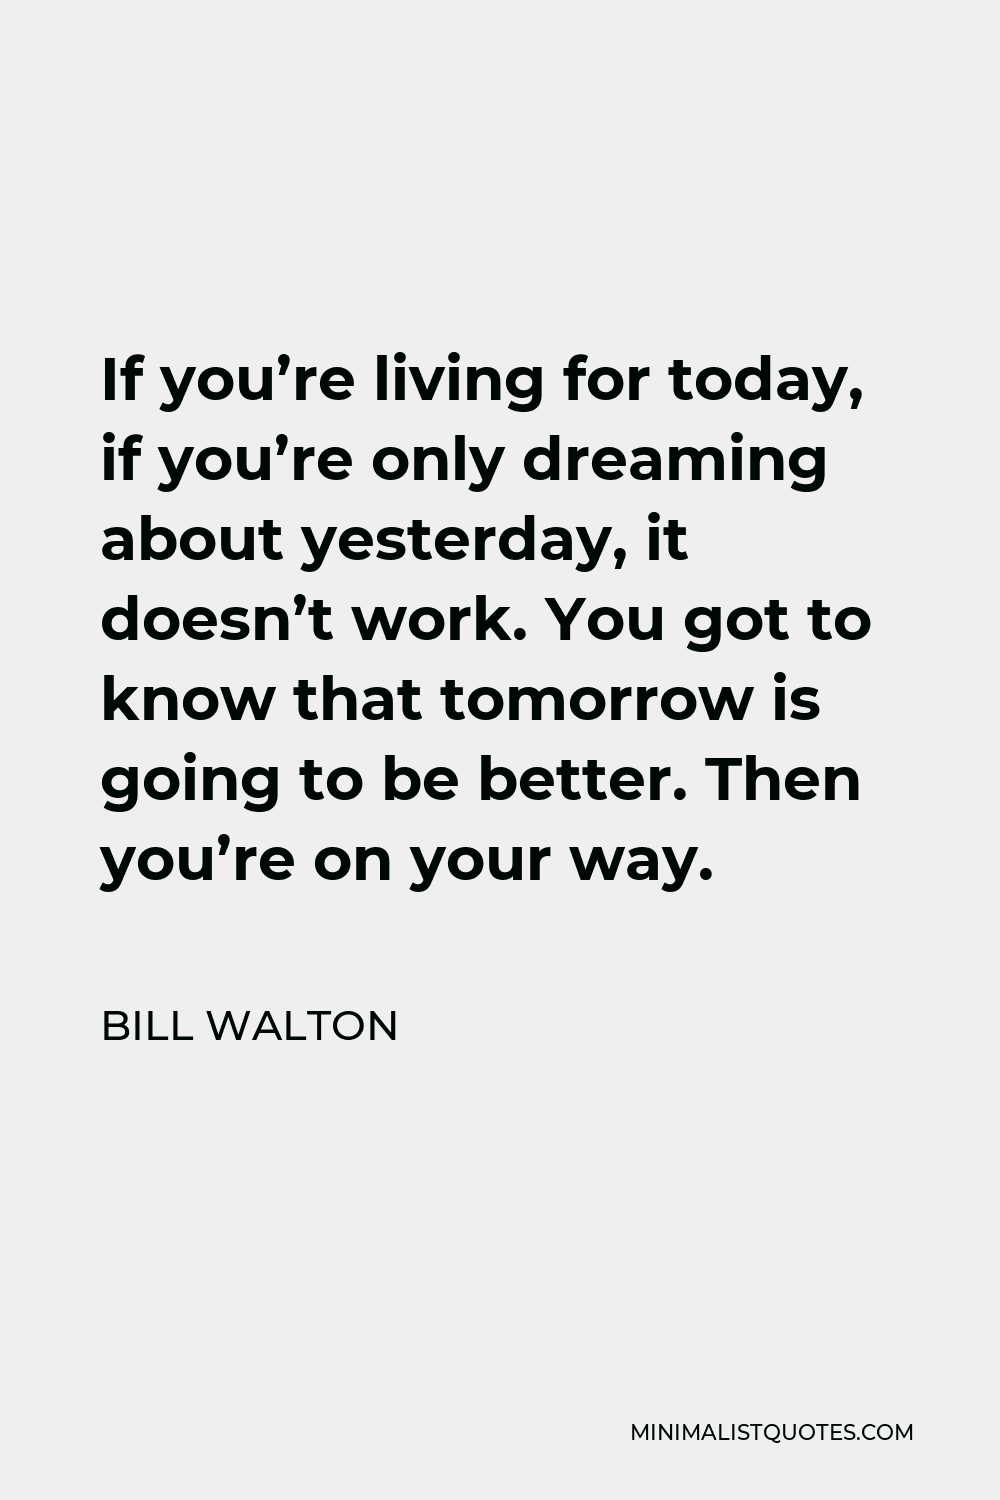 Bill Walton Quote - If you’re living for today, if you’re only dreaming about yesterday, it doesn’t work. You got to know that tomorrow is going to be better. Then you’re on your way.